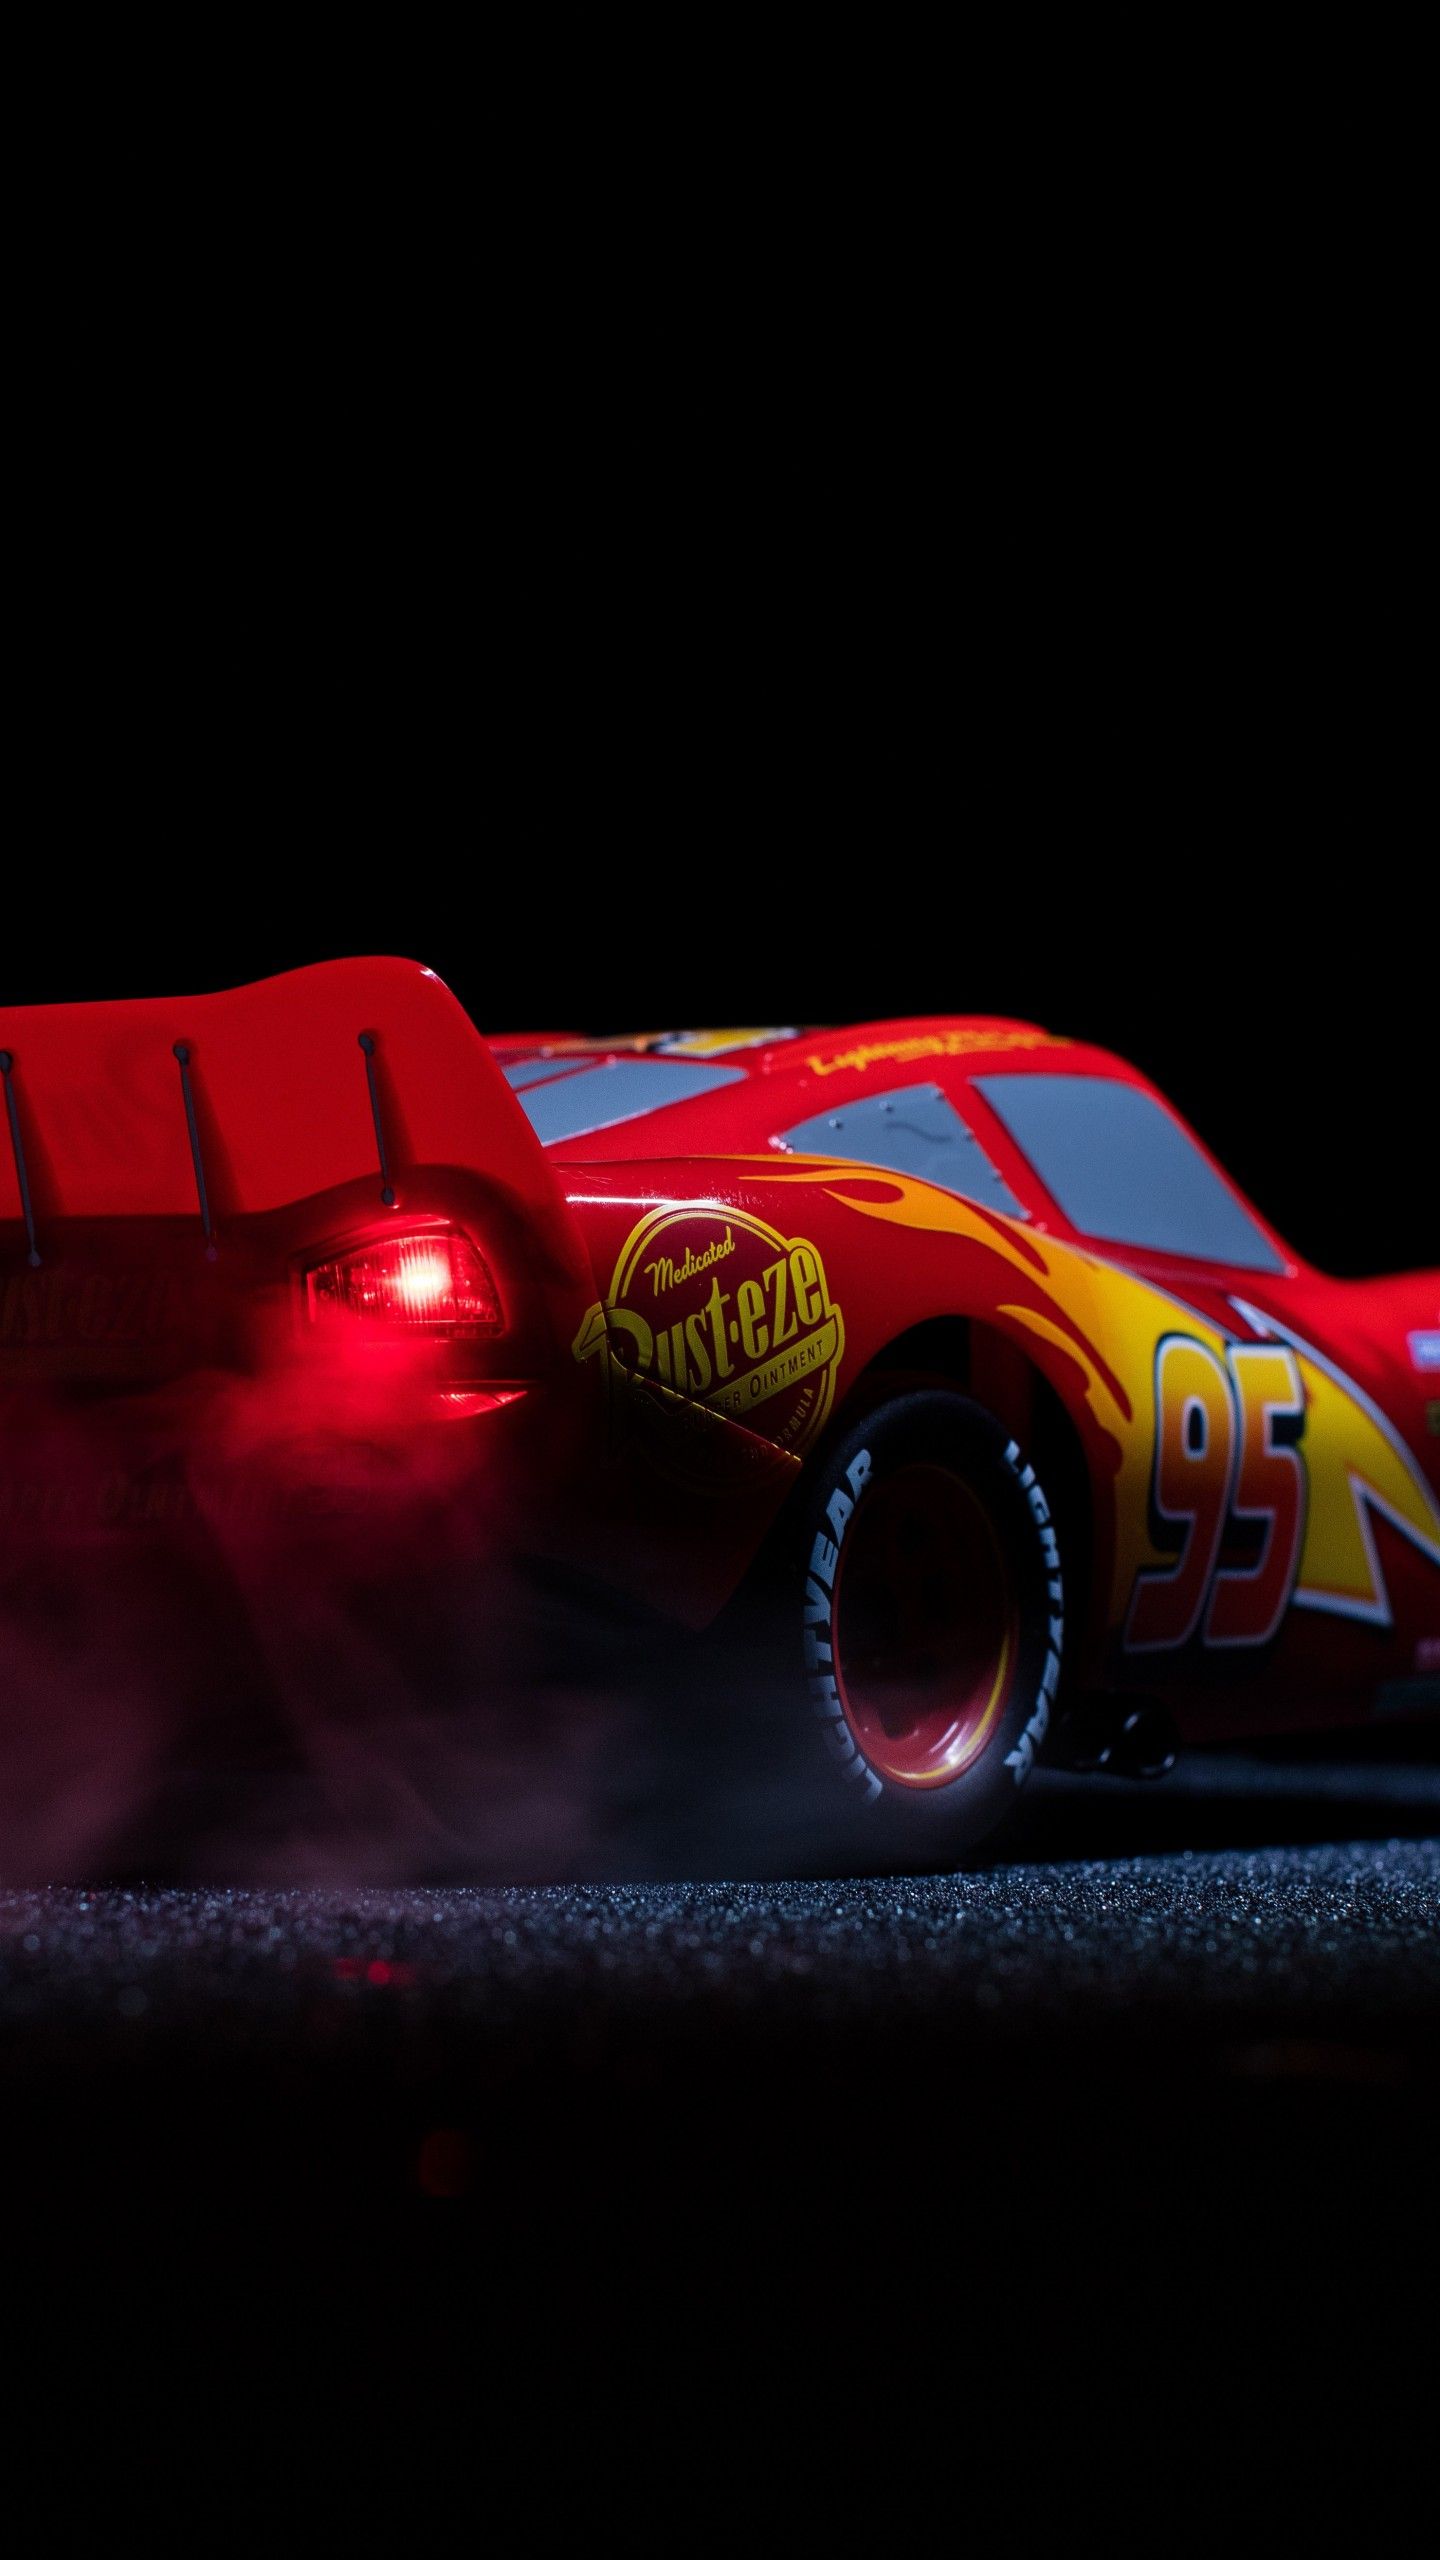 Wallpaper Lightning McQueen, 4K, 8K, Movies,. Wallpaper for iPhone, Android, Mobile and Desktop